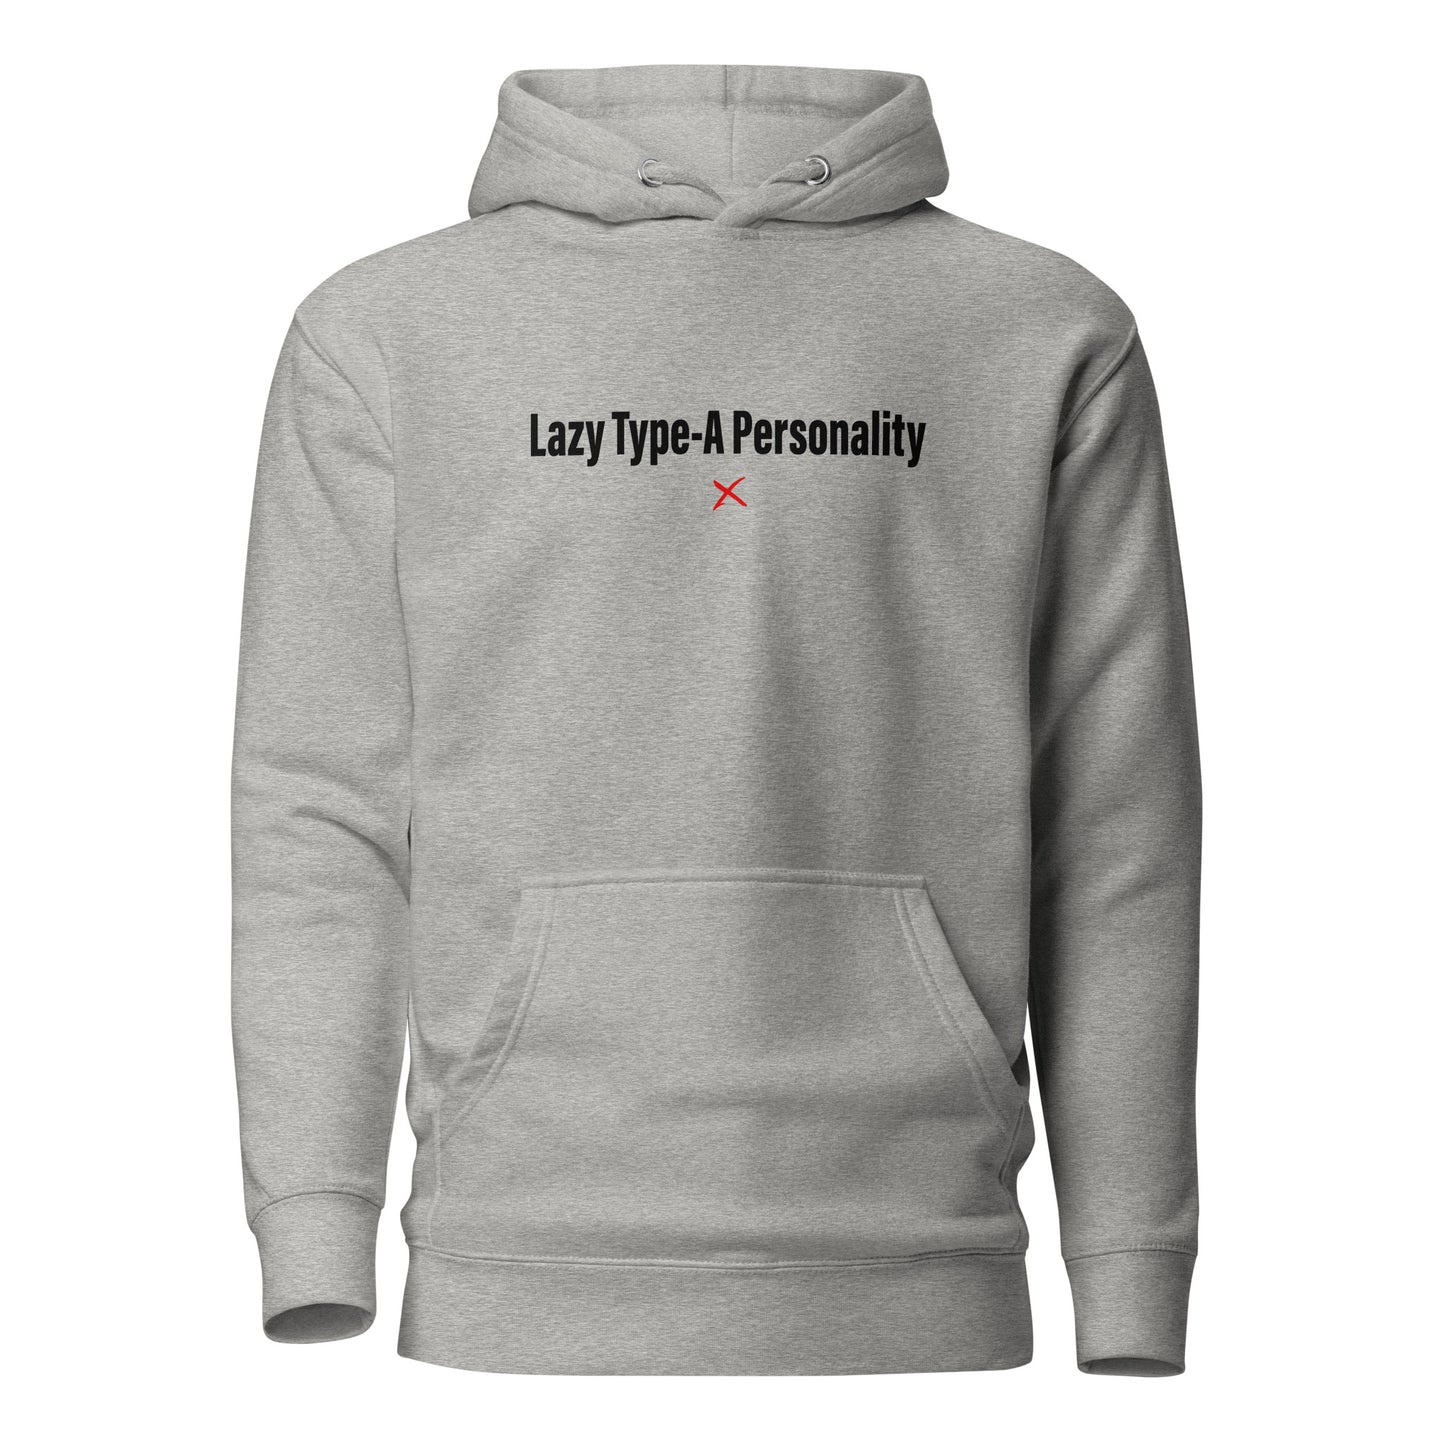 Lazy Type-A Personality - Hoodie